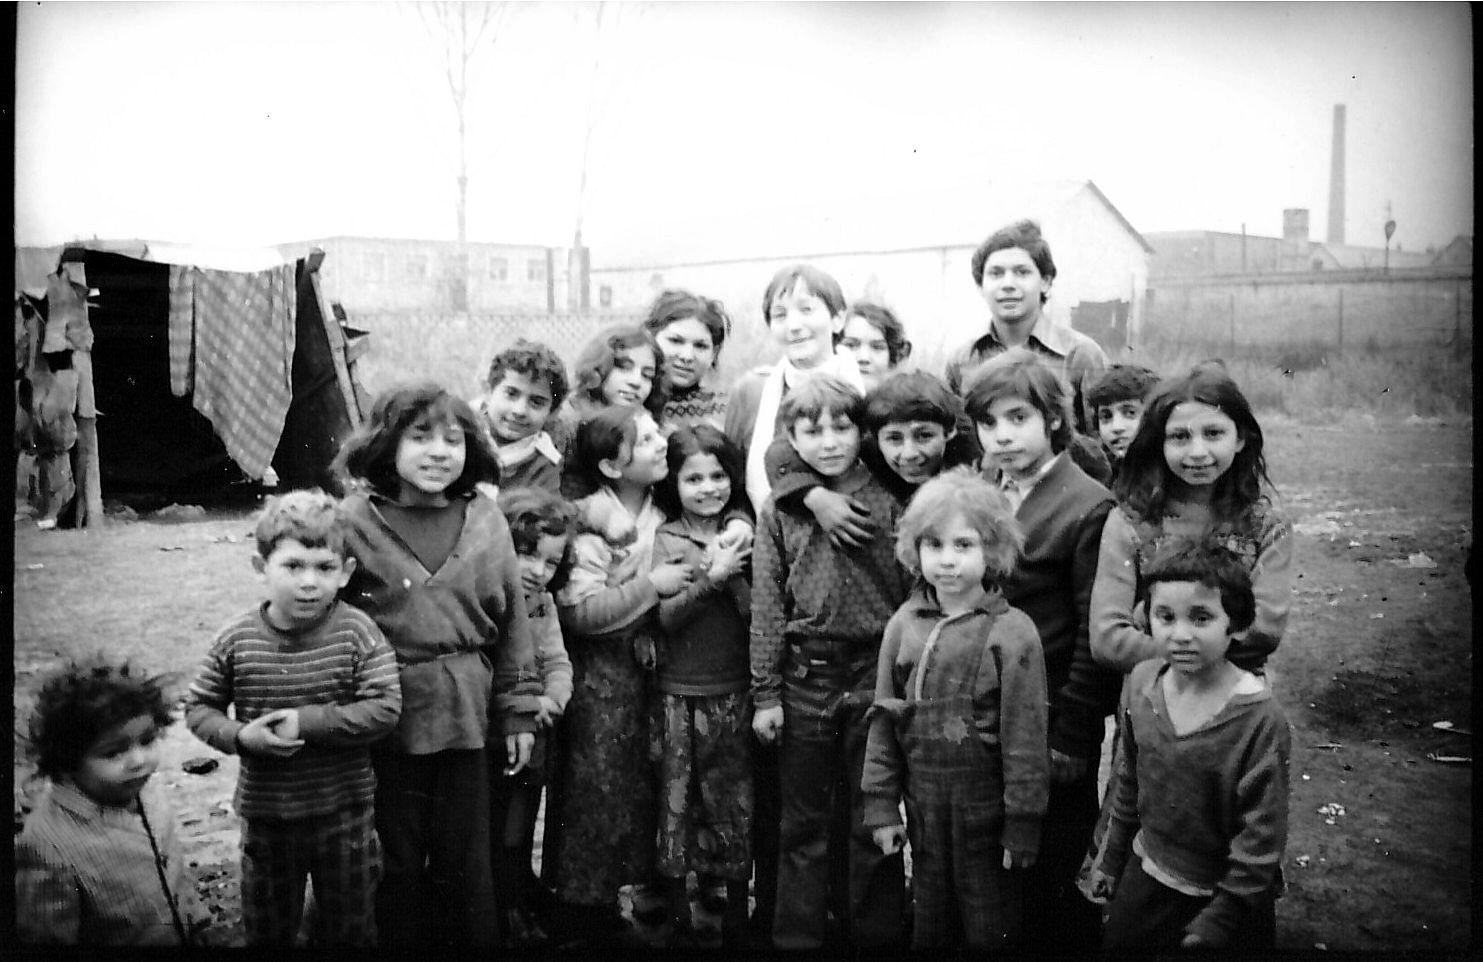 Children in a Gipsy colony in Esztergom-kertváros, Hungary, 1977Up in the middle can be seen sociologist Ottília Solt, who two years later founded SZETA together with seven friends.